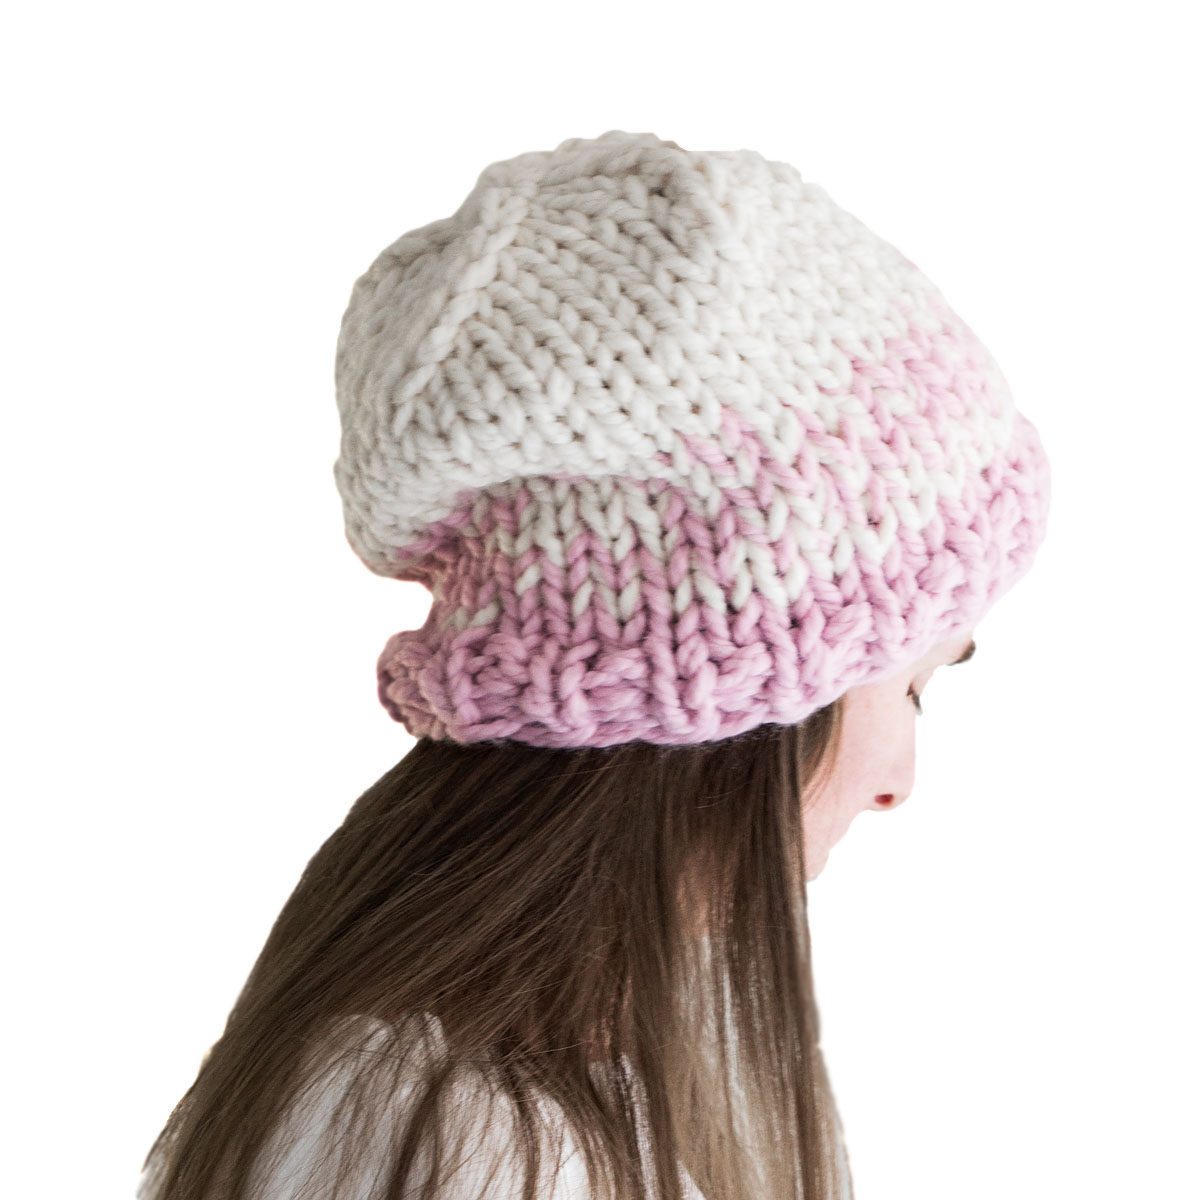 Free Patterns For Knitted Hats The Best Super Bulky Hat Knitting Pattern